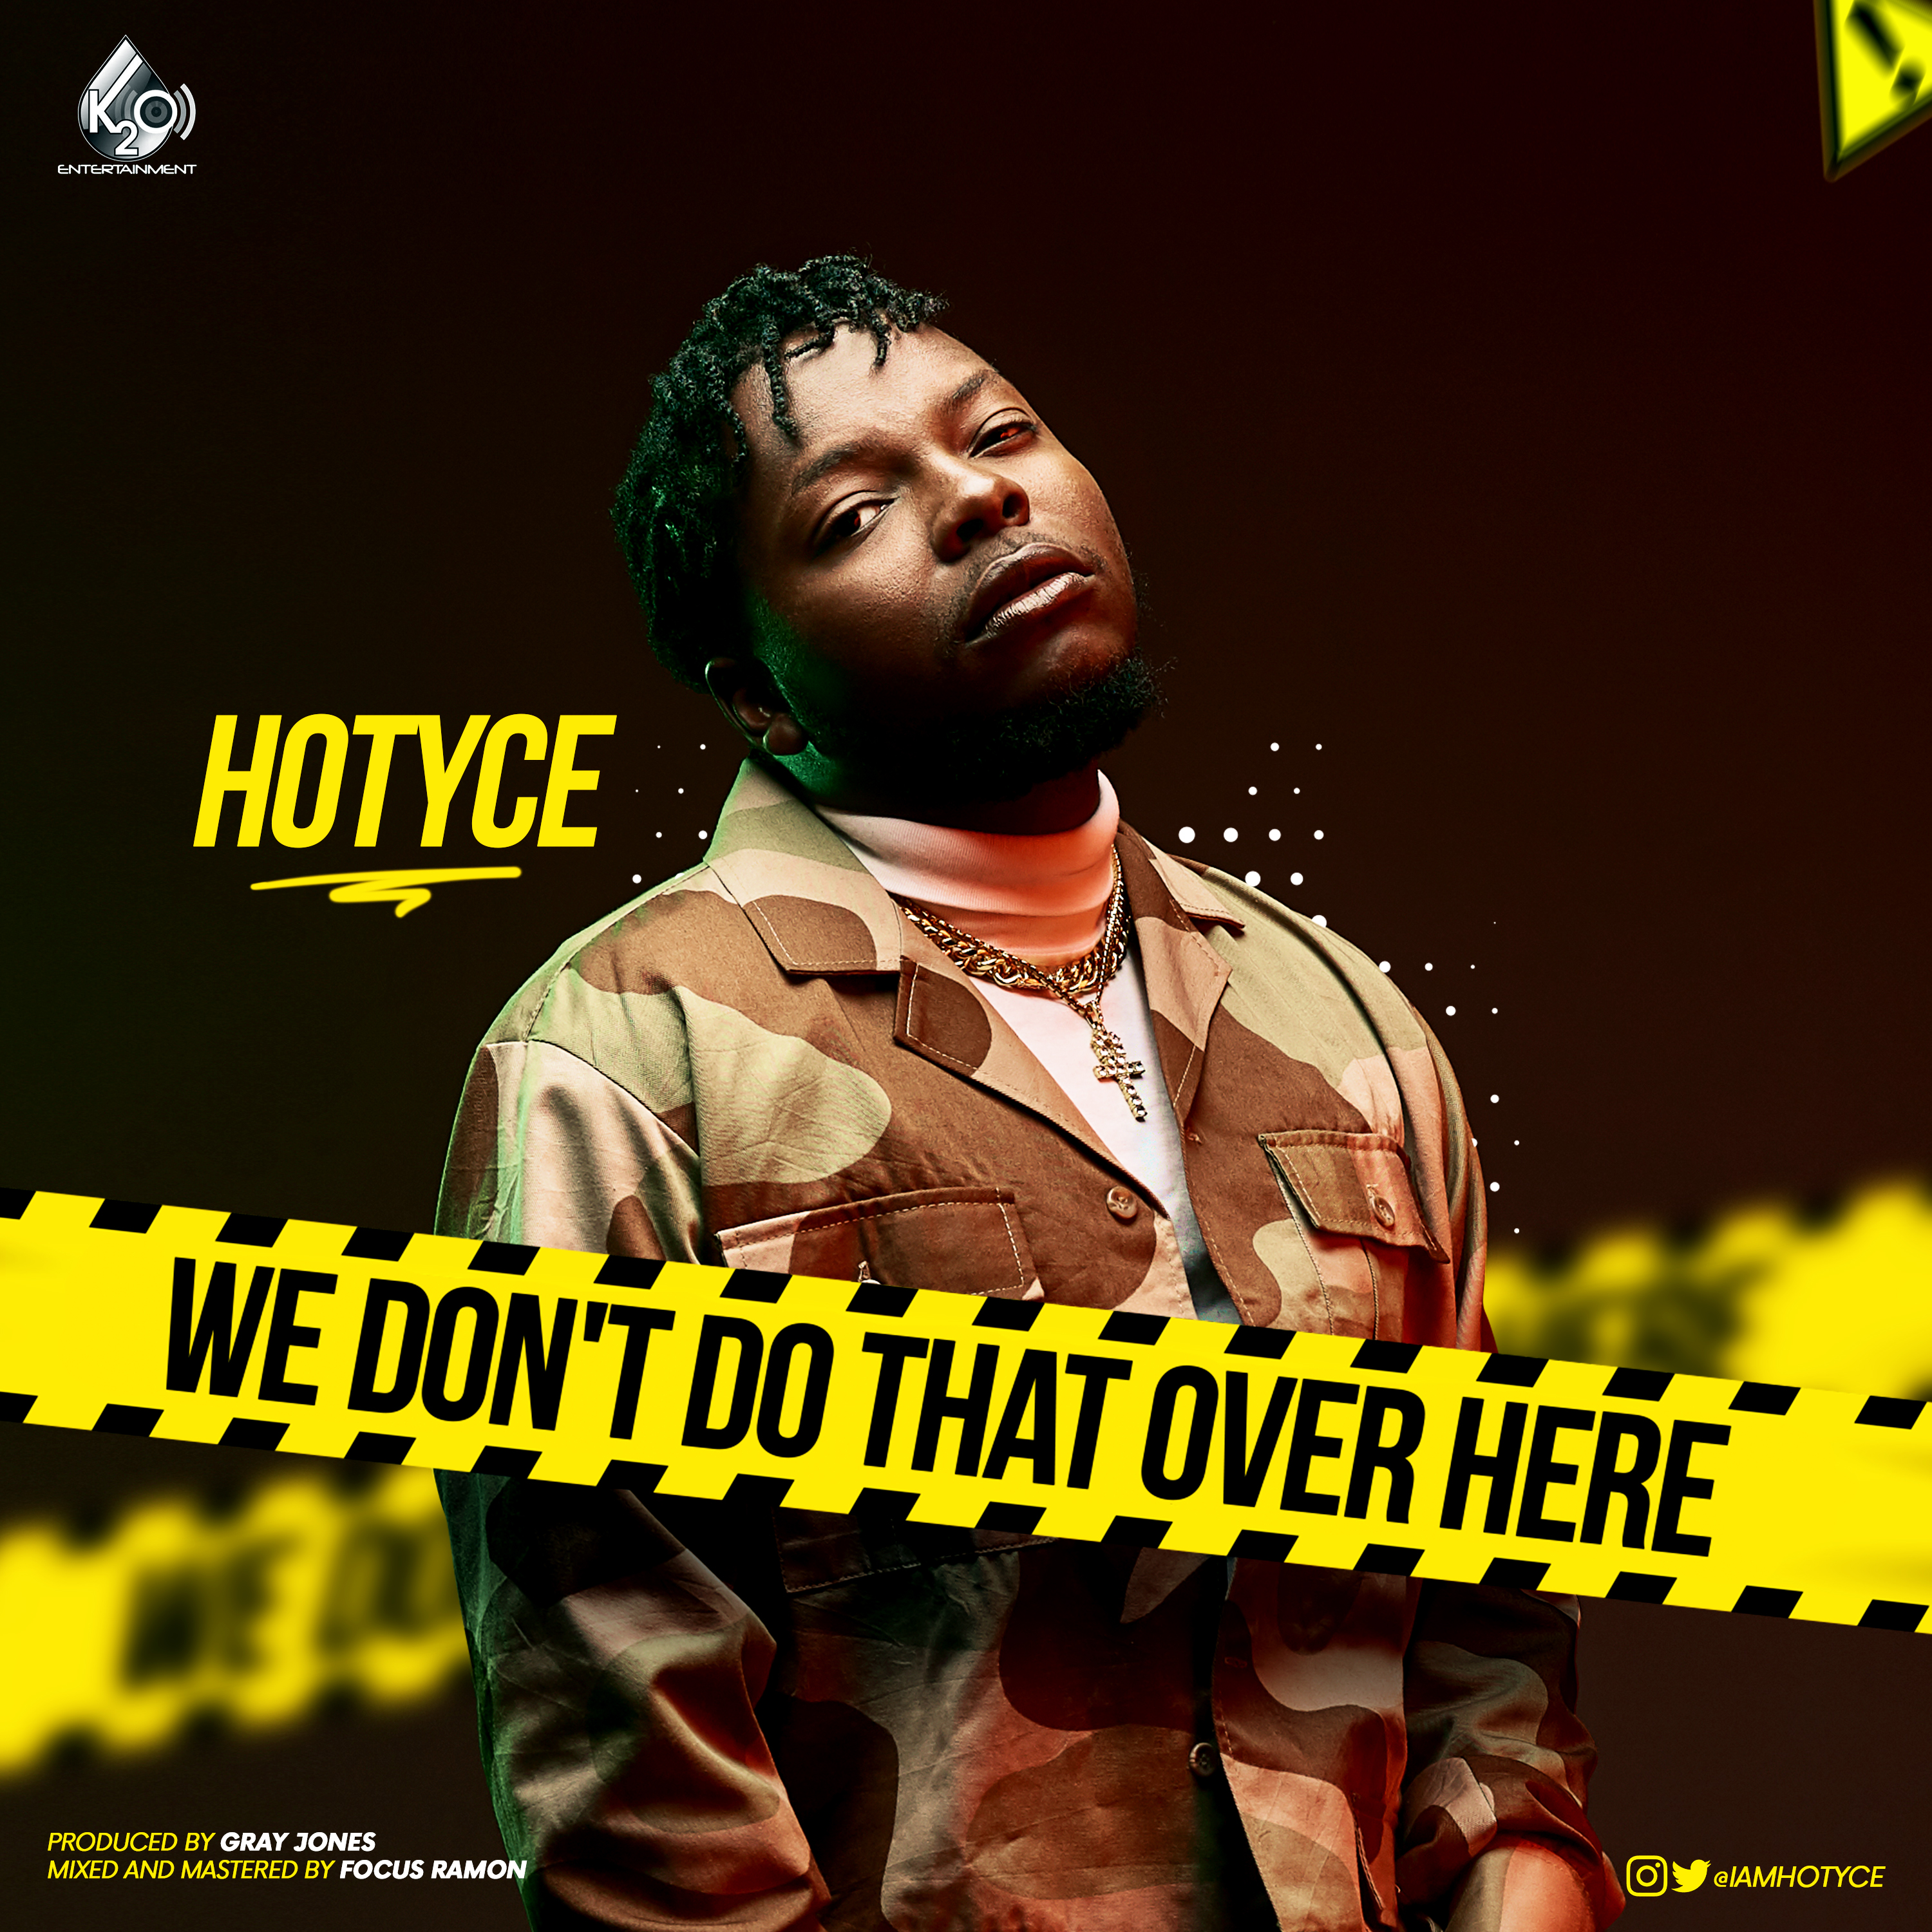 Hotyce – We Dont DO That Over Here